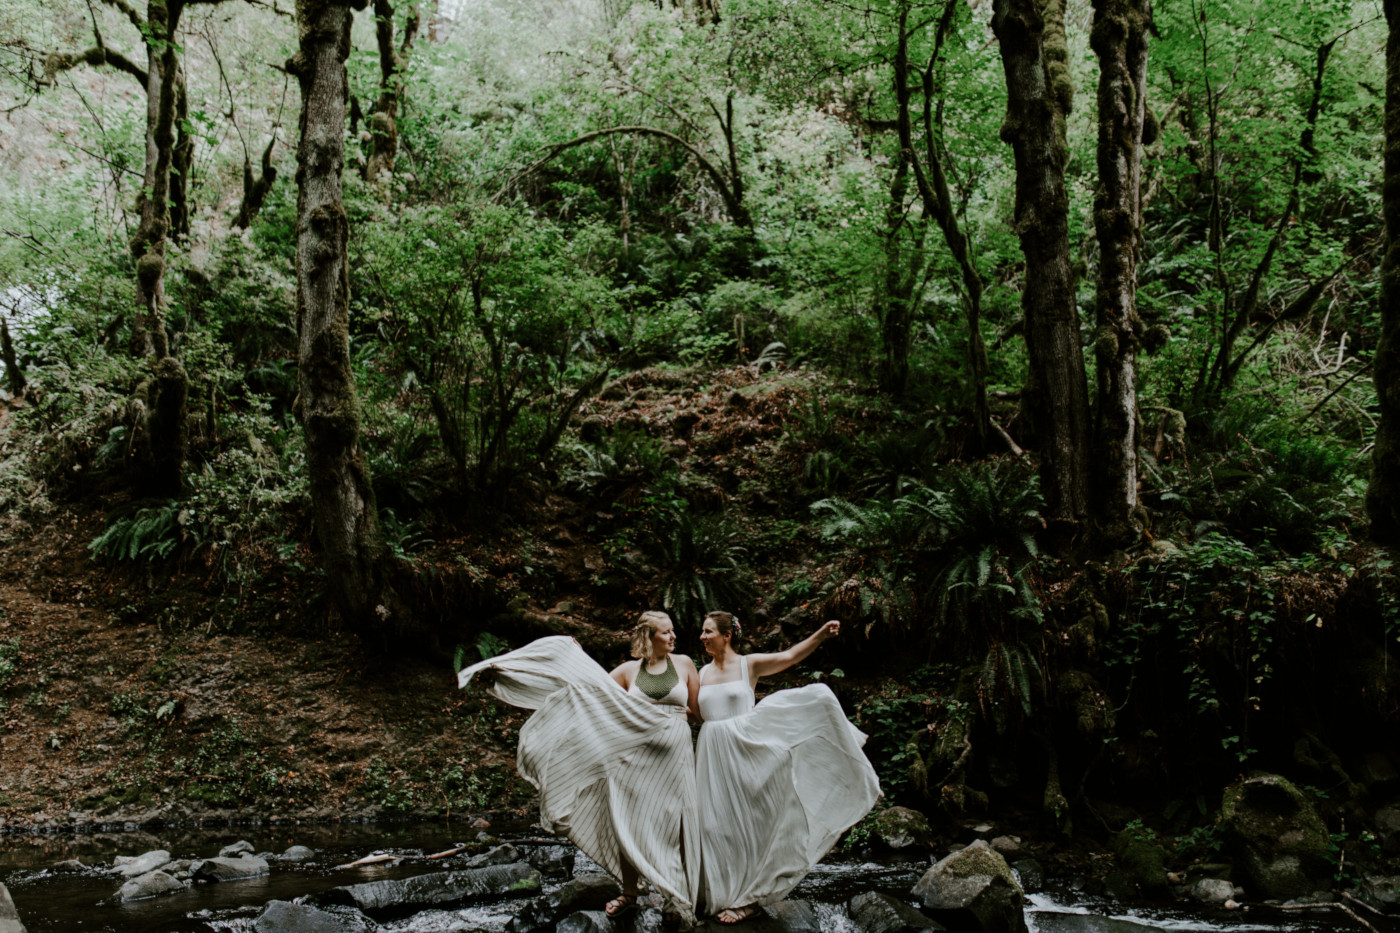 Audrey and Kate toss their dresses to the side. Elopement wedding photography at Bridal Veil Falls by Sienna Plus Josh.